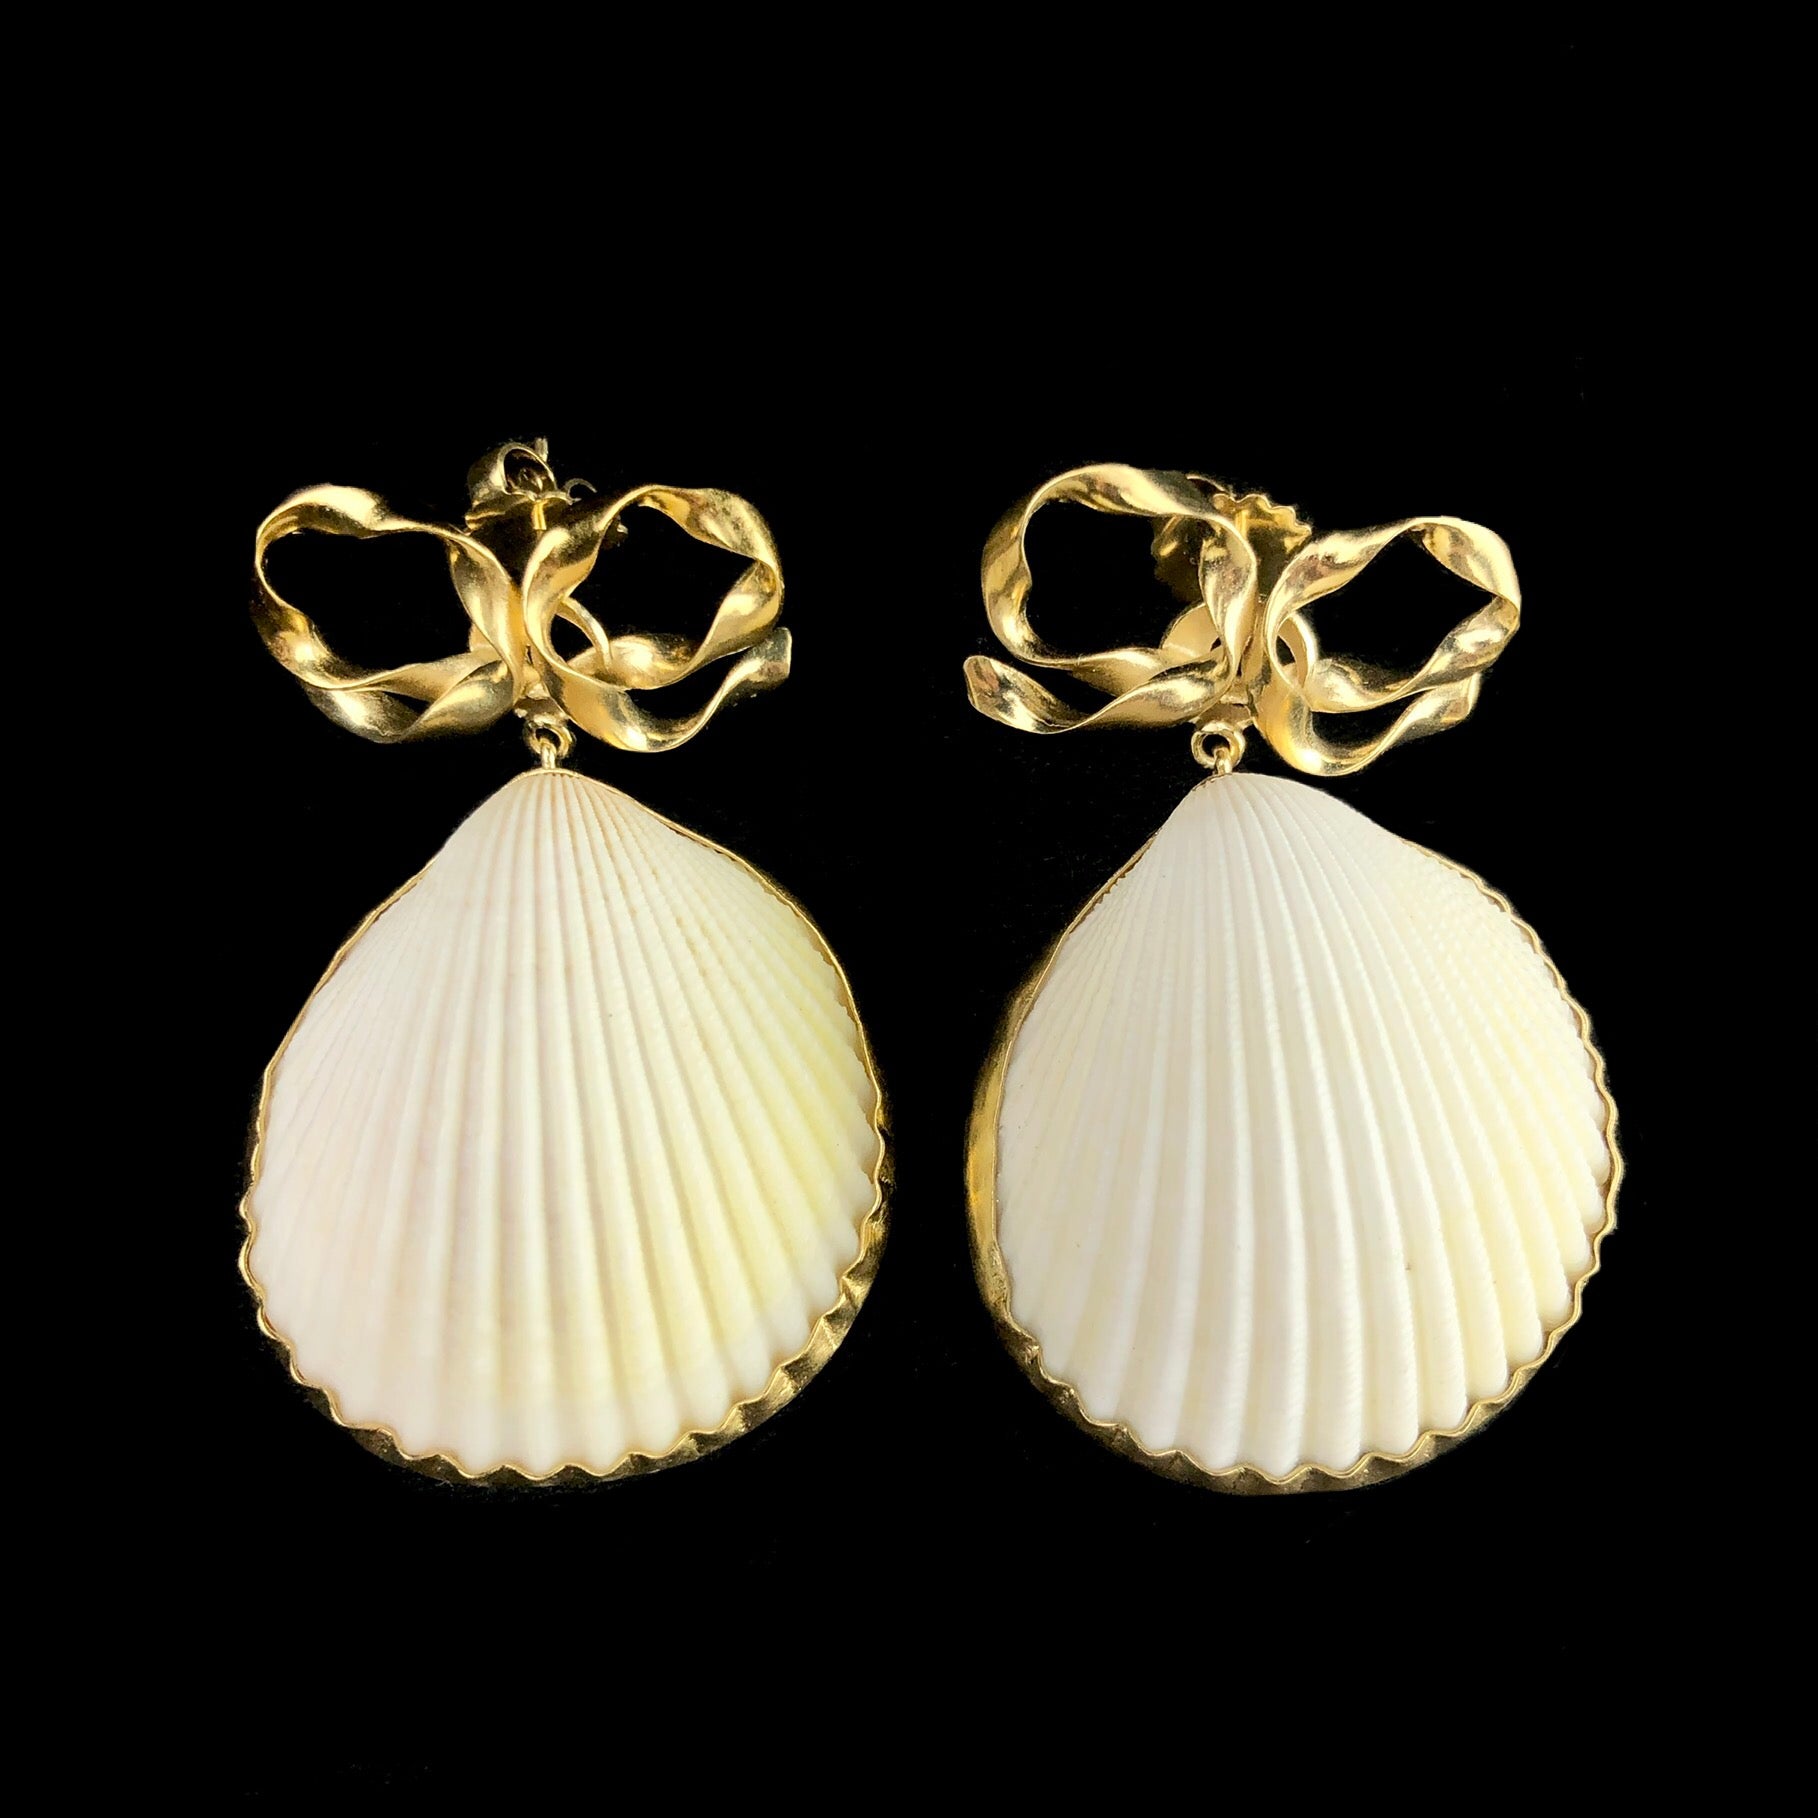 Bow and Shell Stud Earrings shown side by side